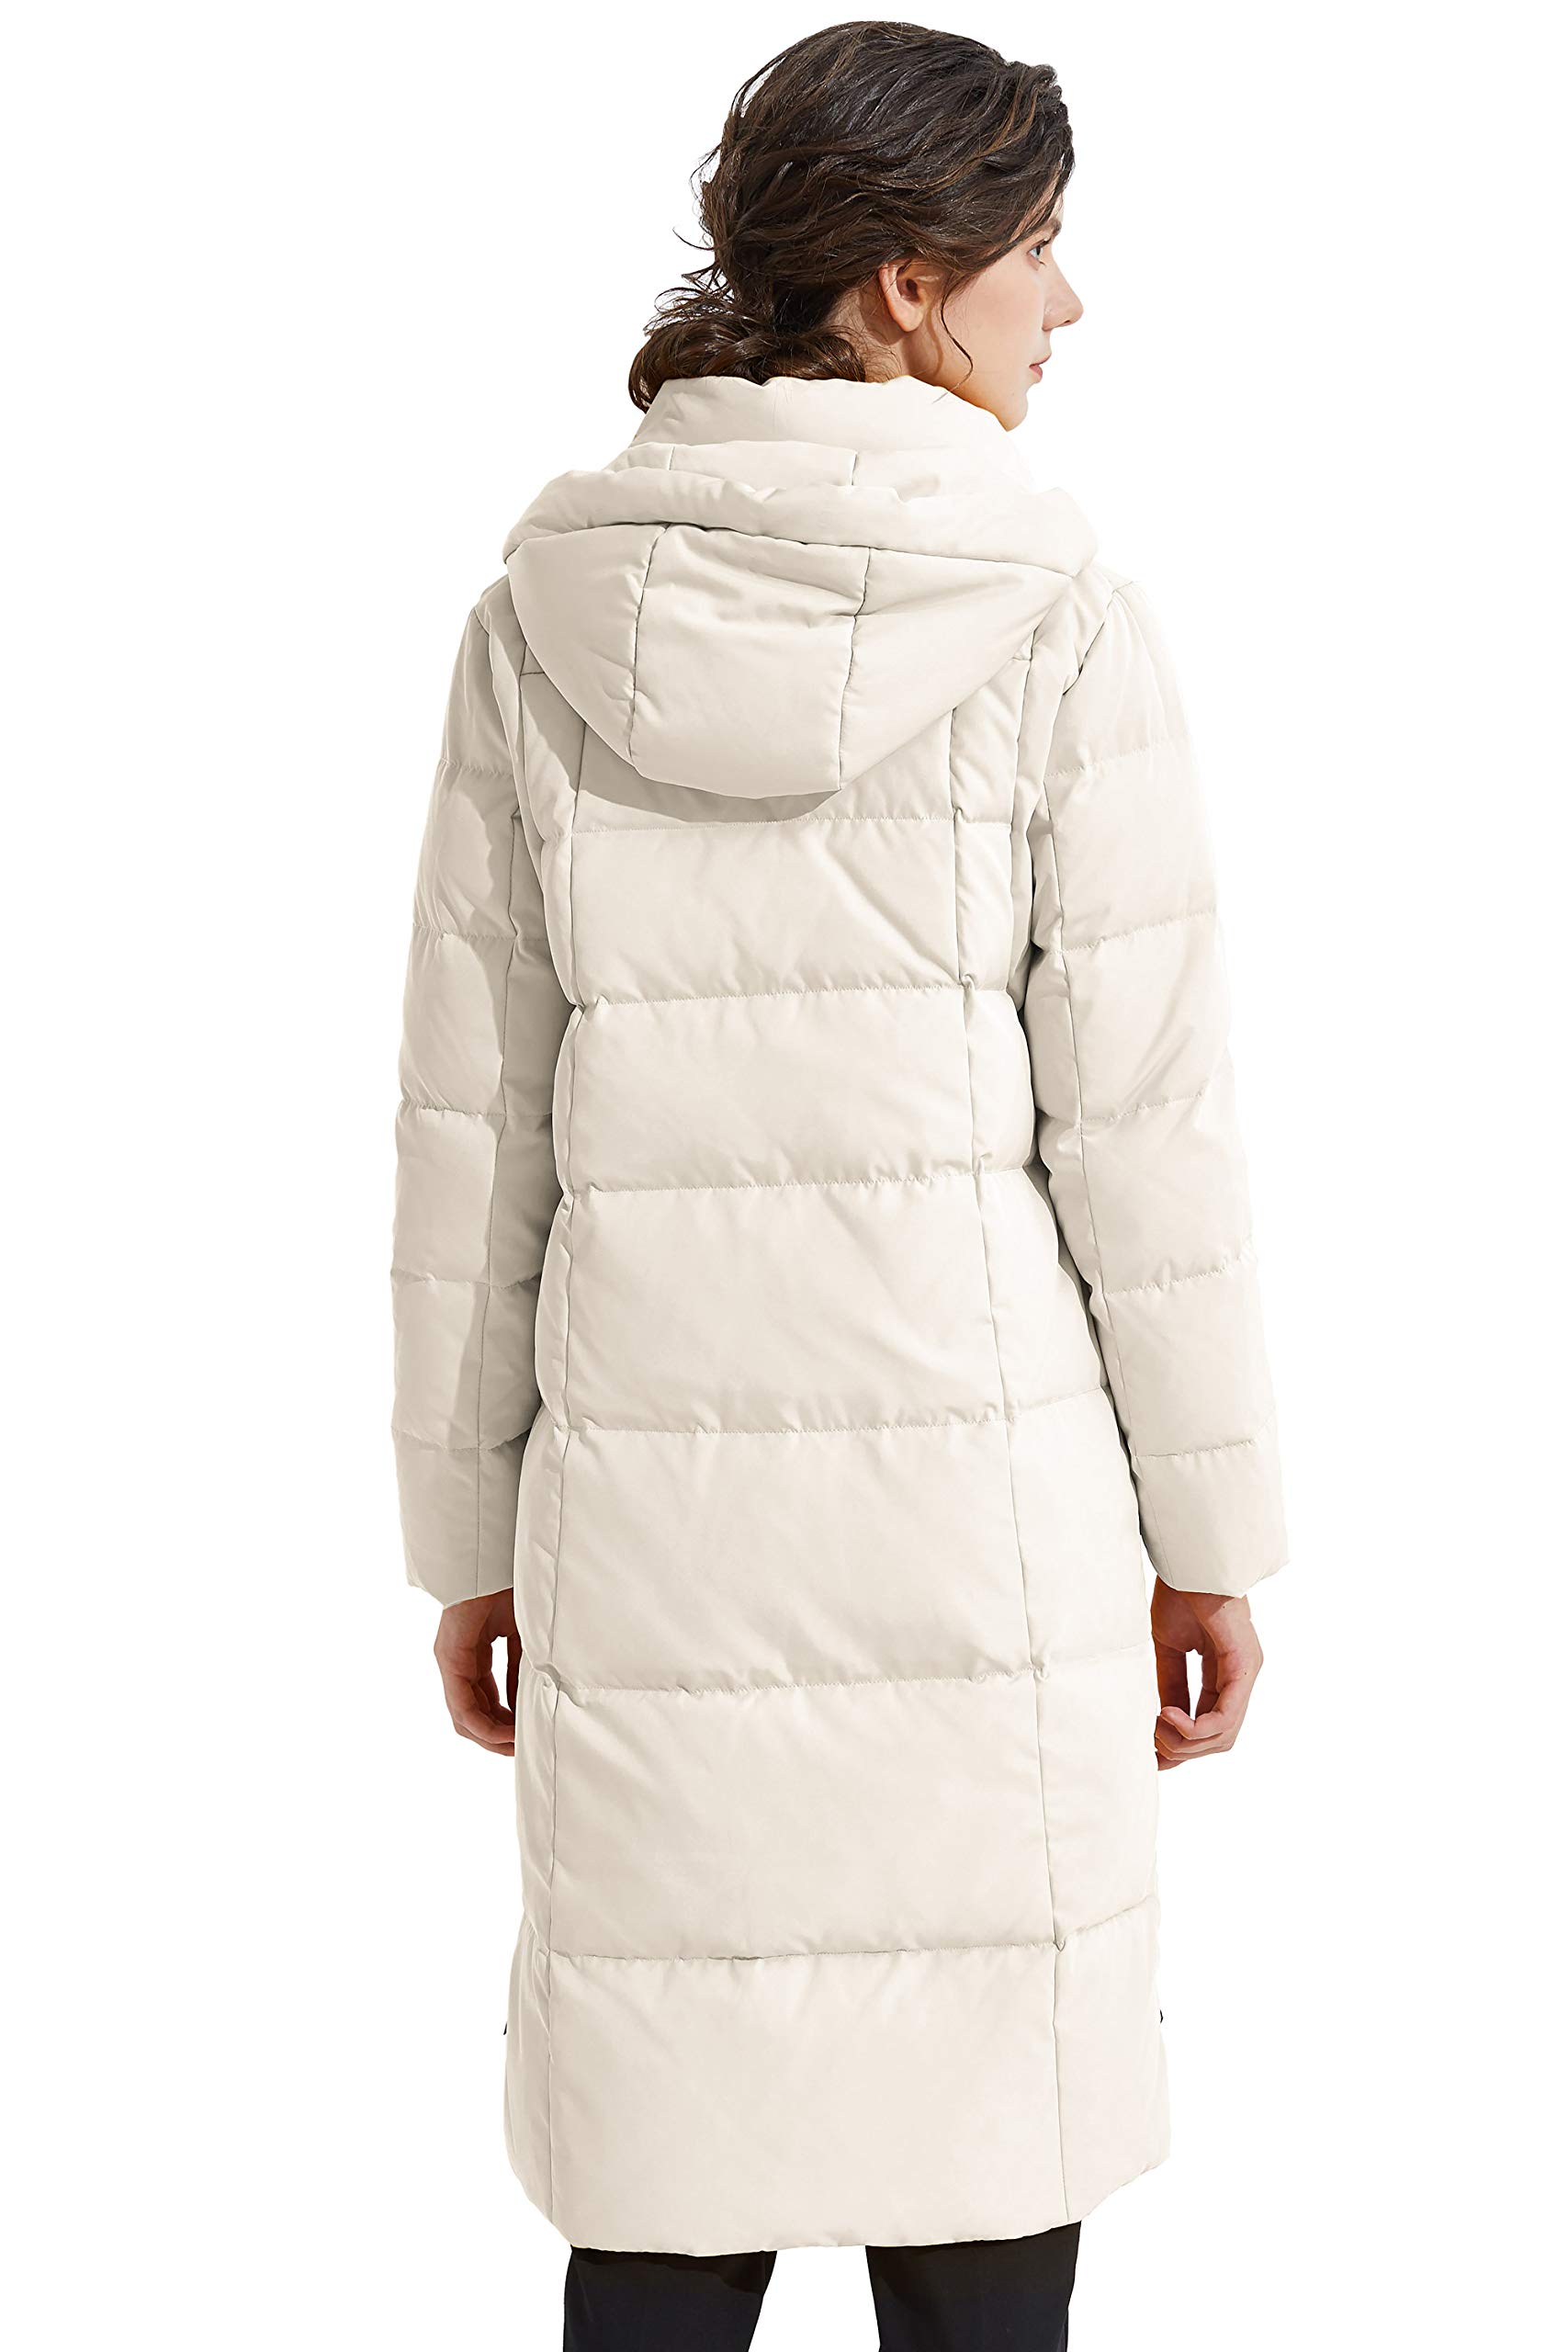 Orolay Women's Thickened Down Jacket Long Winter Coat Hooded Puffer Jacket